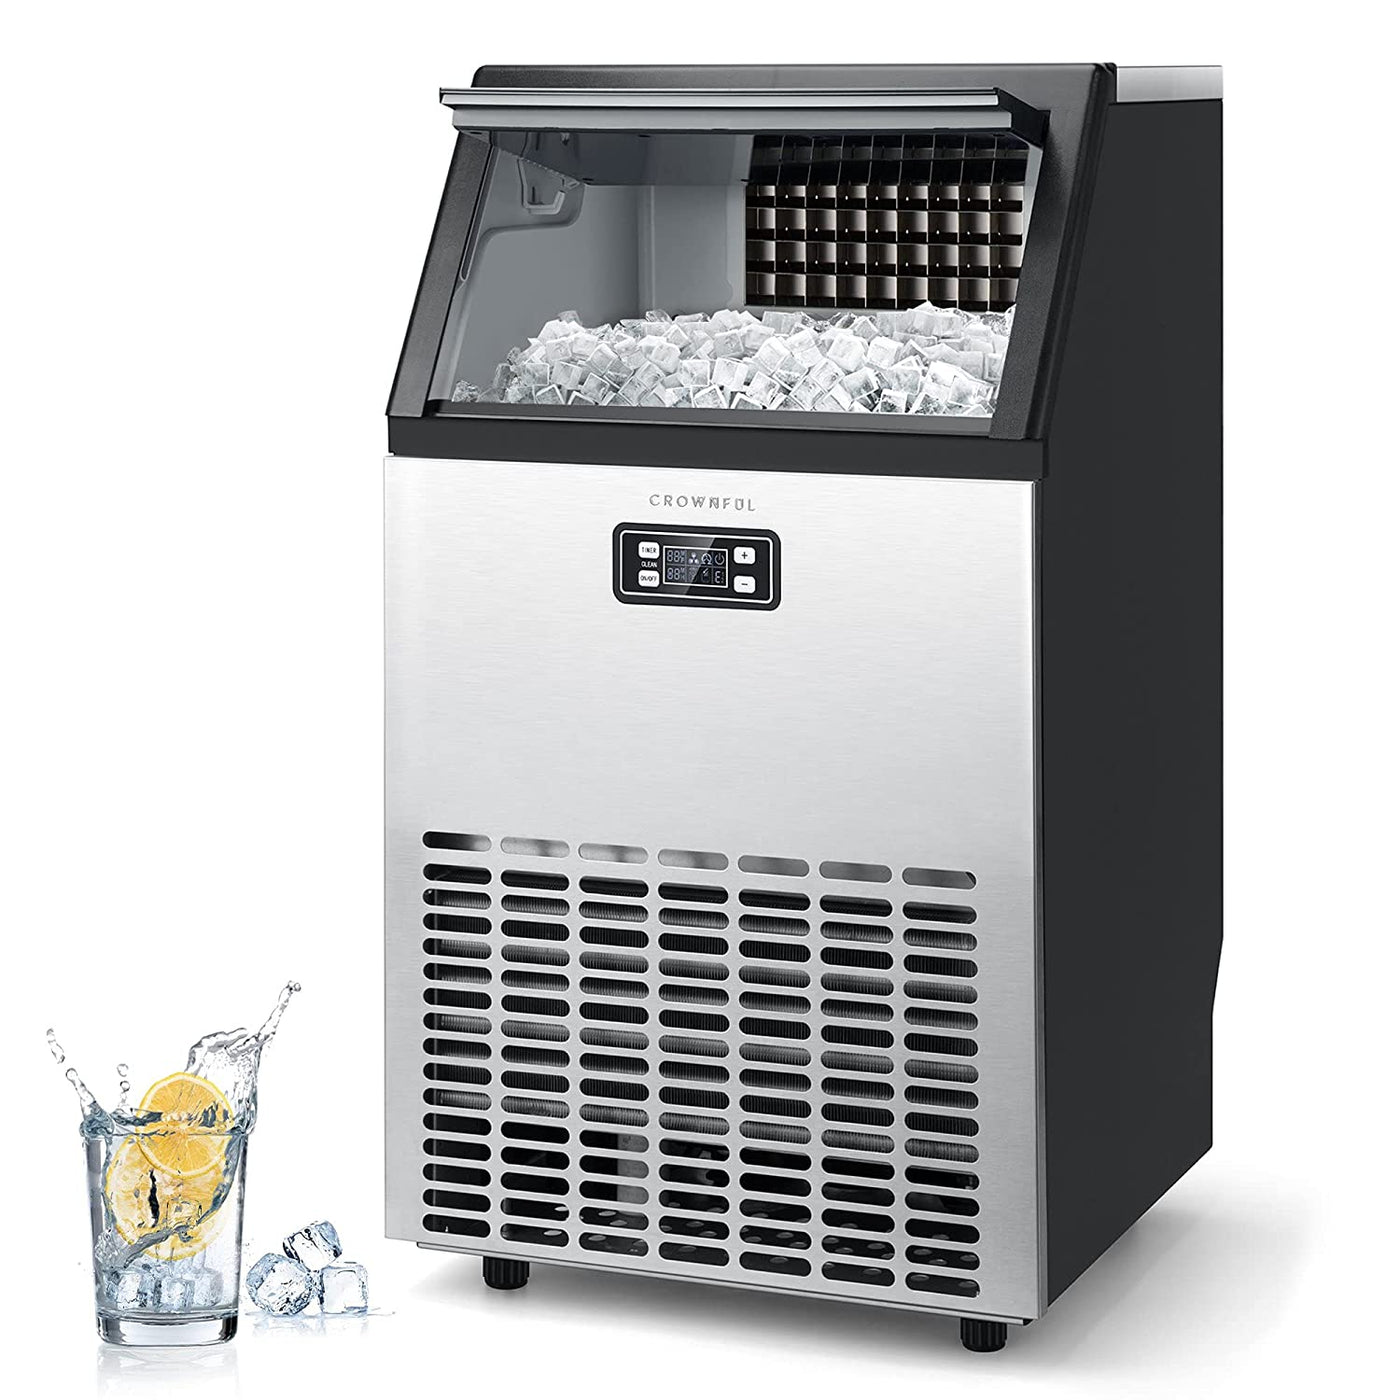 33 lbs Stainless Steel Crunchy Chewable Nugget Ice Maker